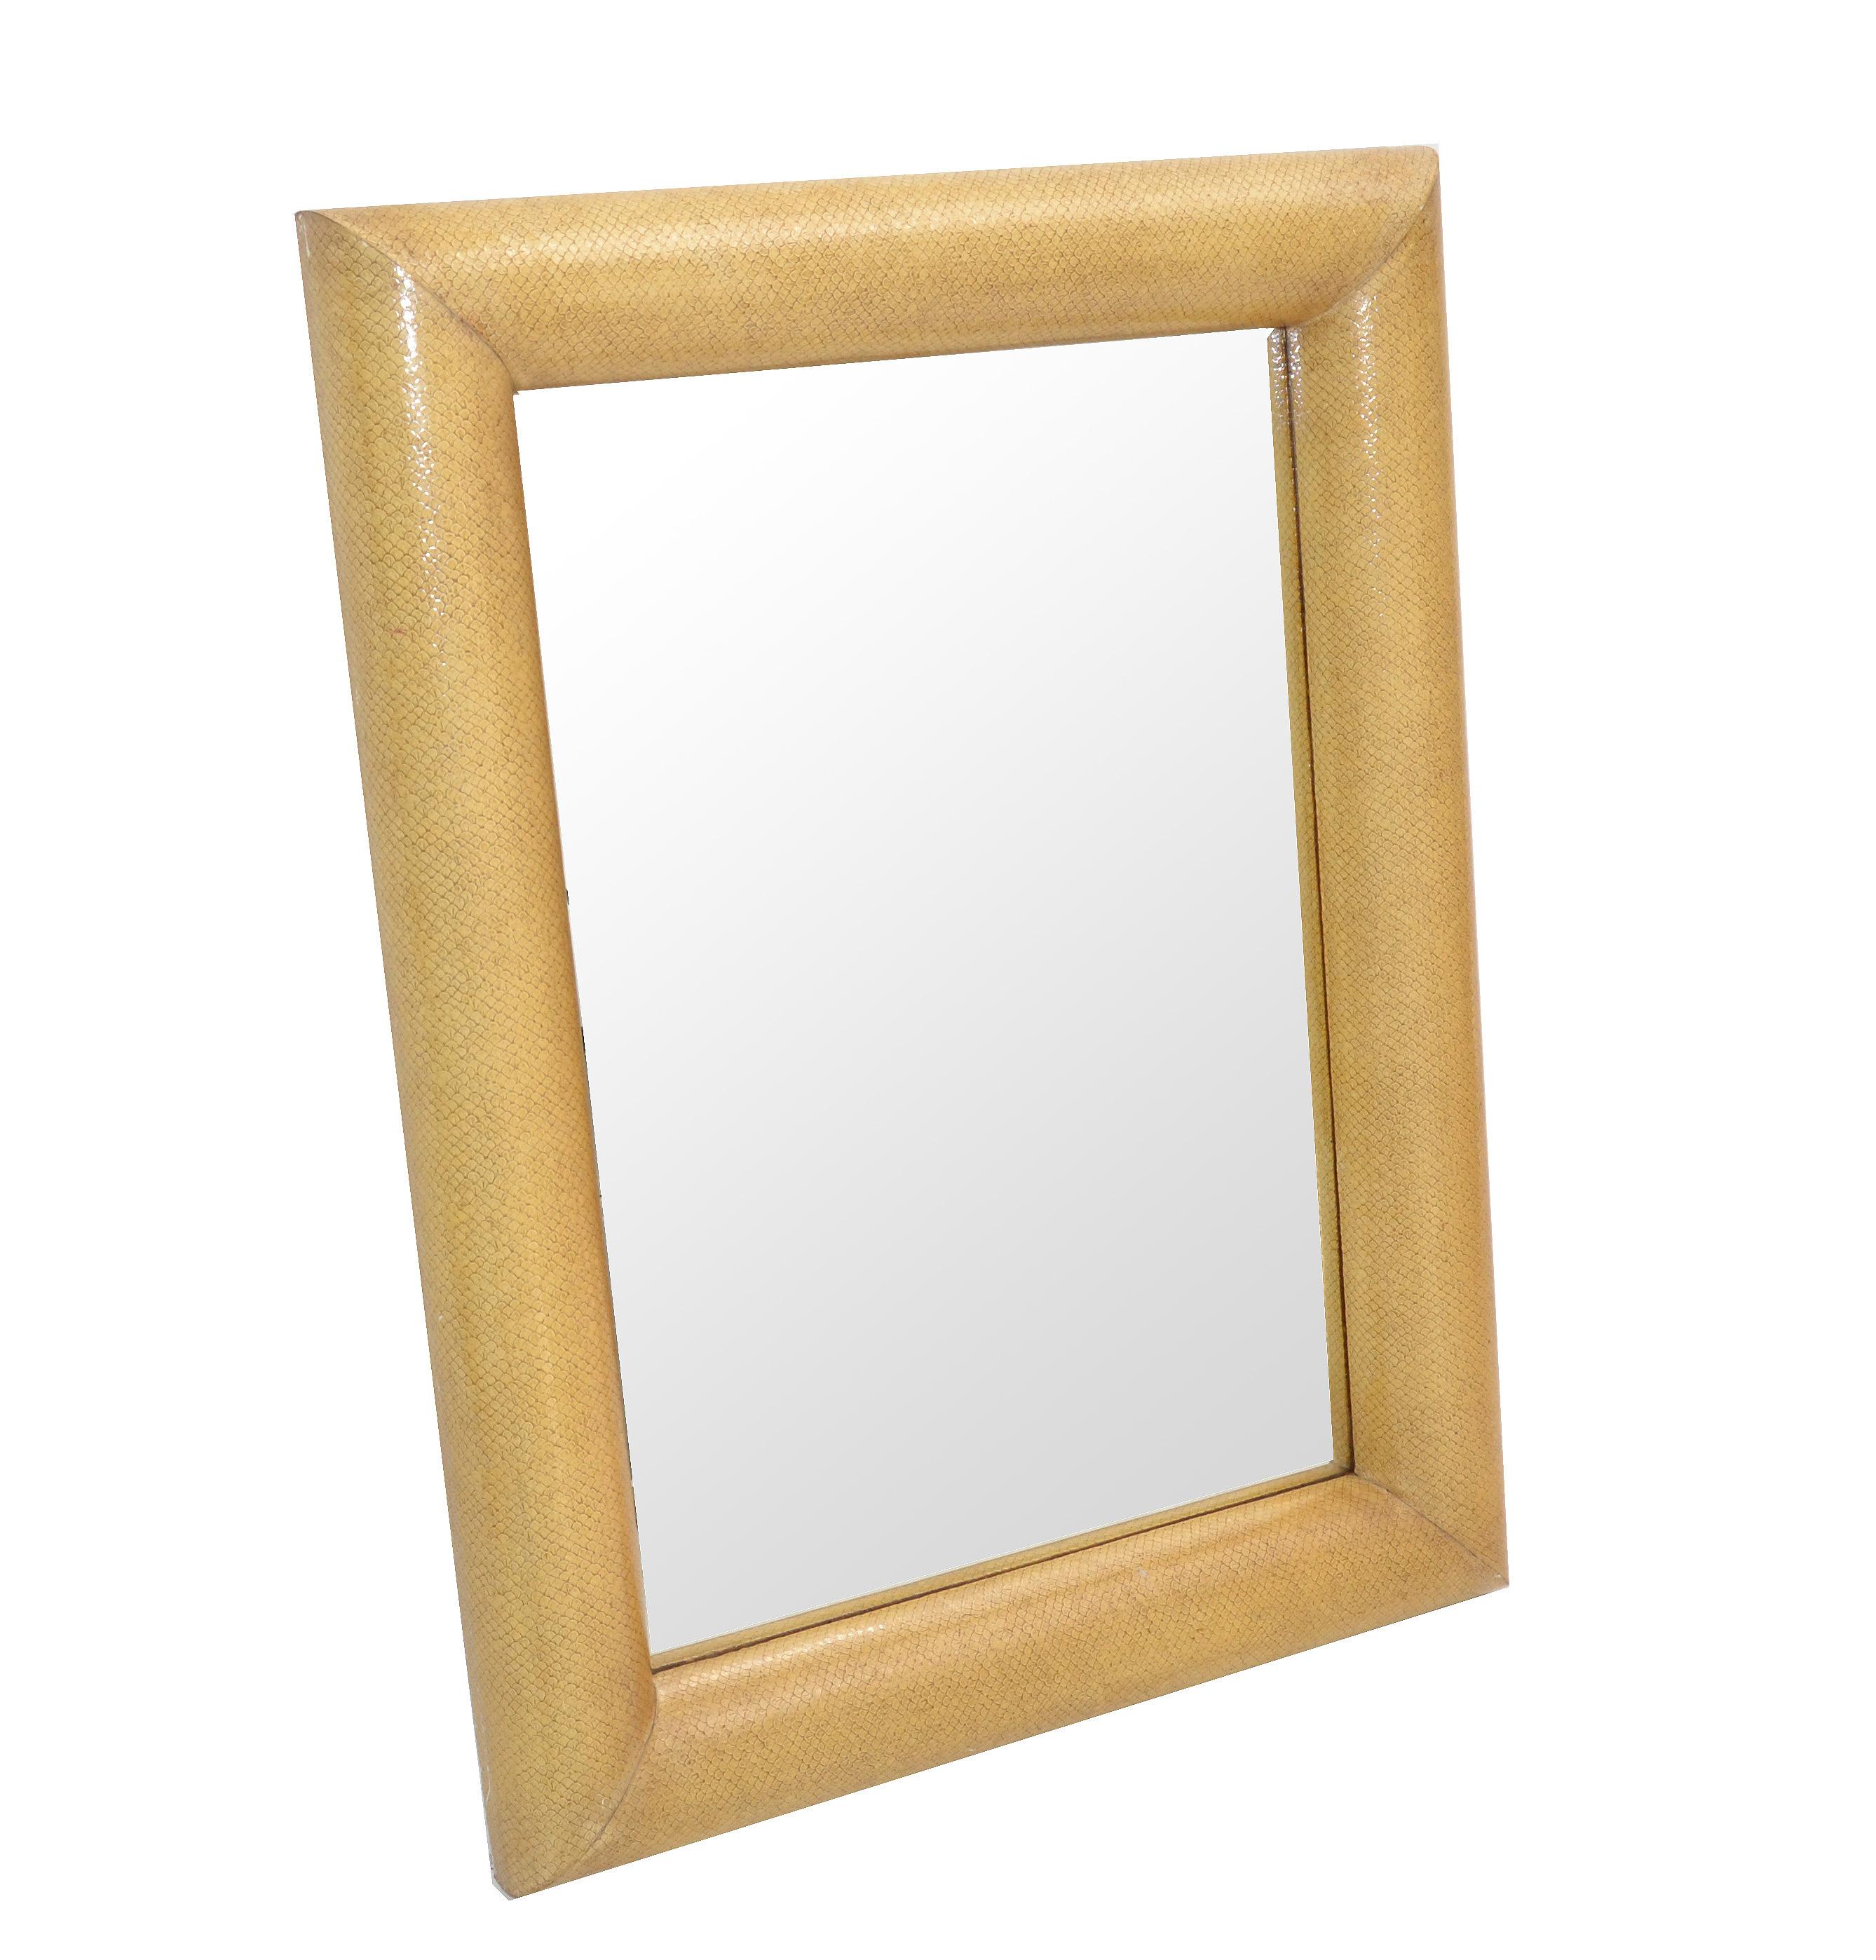 Rectangular wall mirror attributed to Karl Springer in beige snakeskin with wooden backing for secure hanging construction.
Exquisite unique look which can be hung horizontal as well as vertical.
In all original vintage condition.
Mirror Size: 21